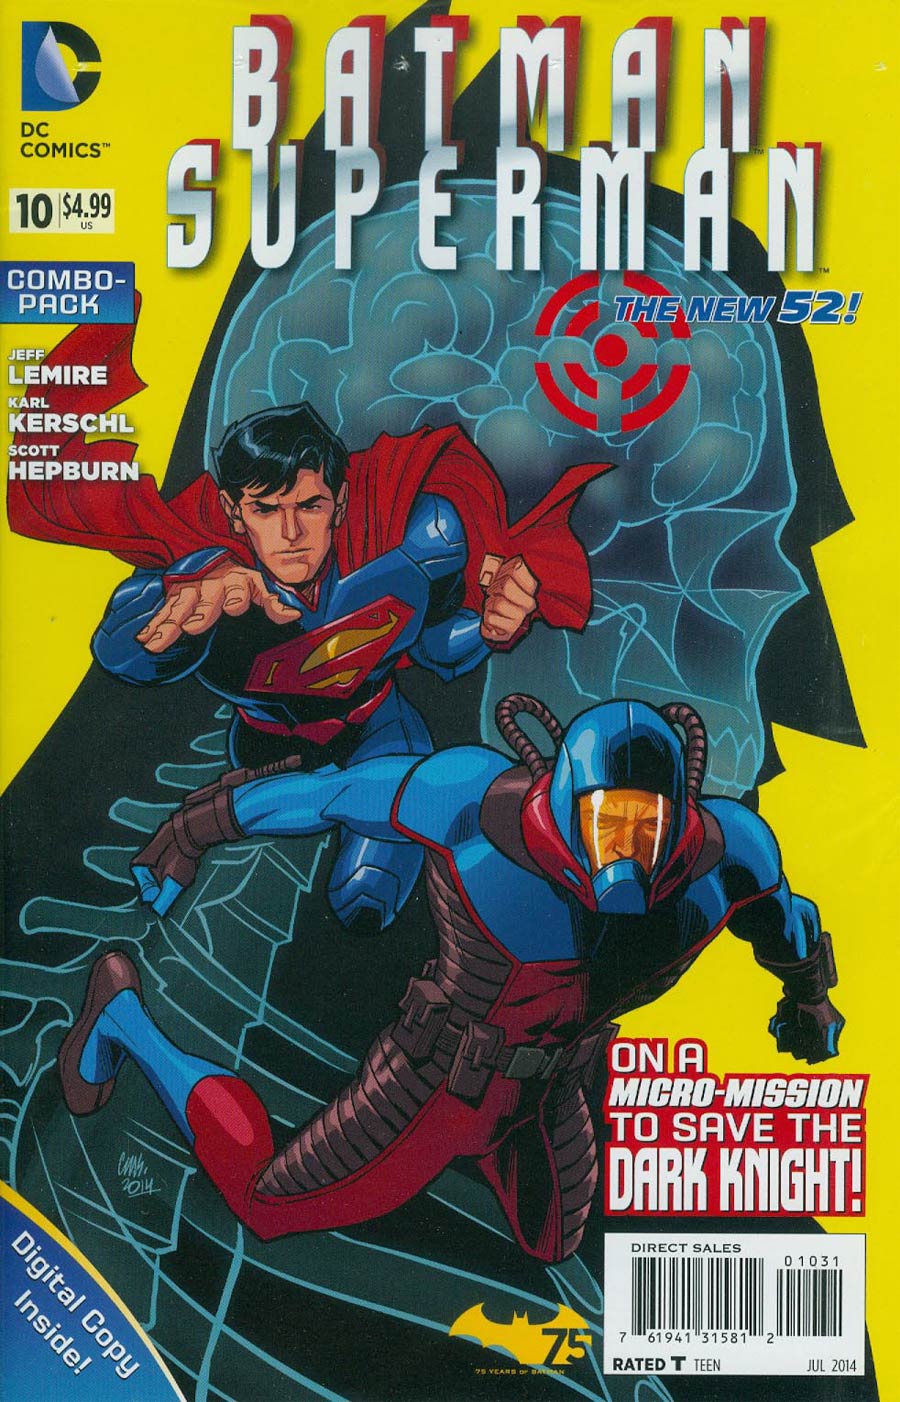 Batman Superman #10 Cover C Combo Pack Without Polybag (First Contact Epilogue)